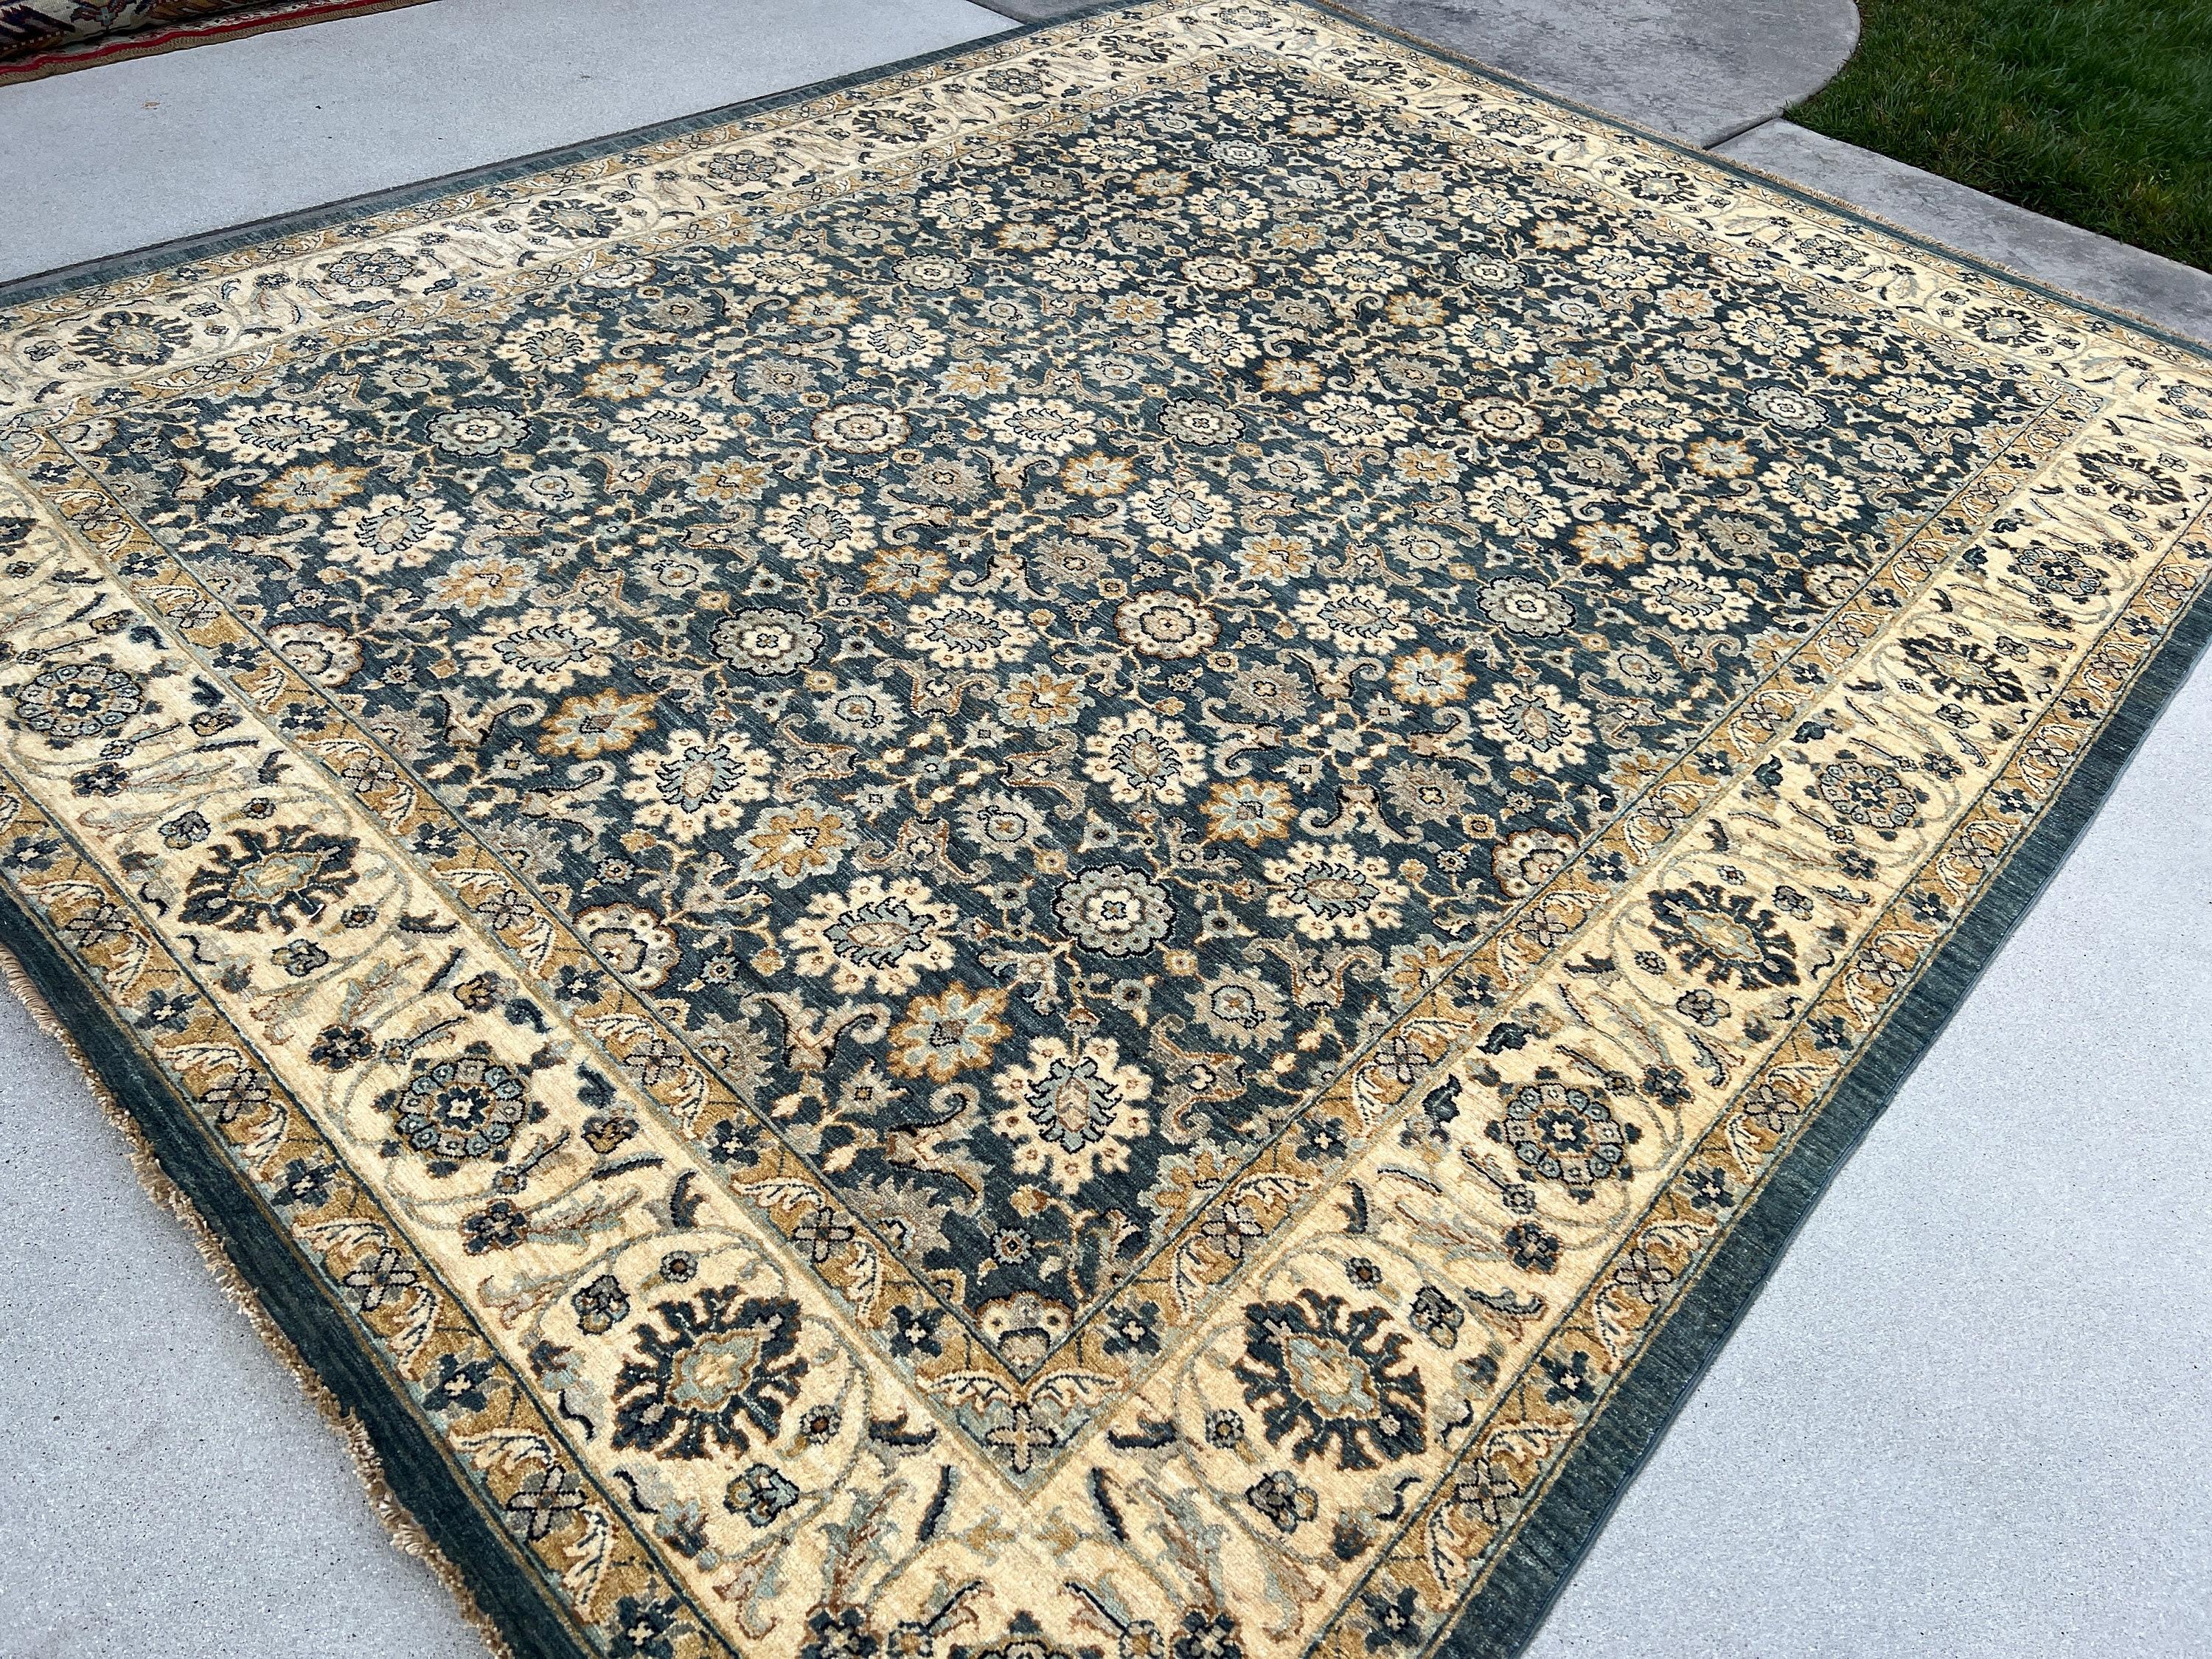 Contemporary 8x10 Hand-Knotted Afghan Rug Premium Hand-Spun Afghan Wool Fair Trade For Sale